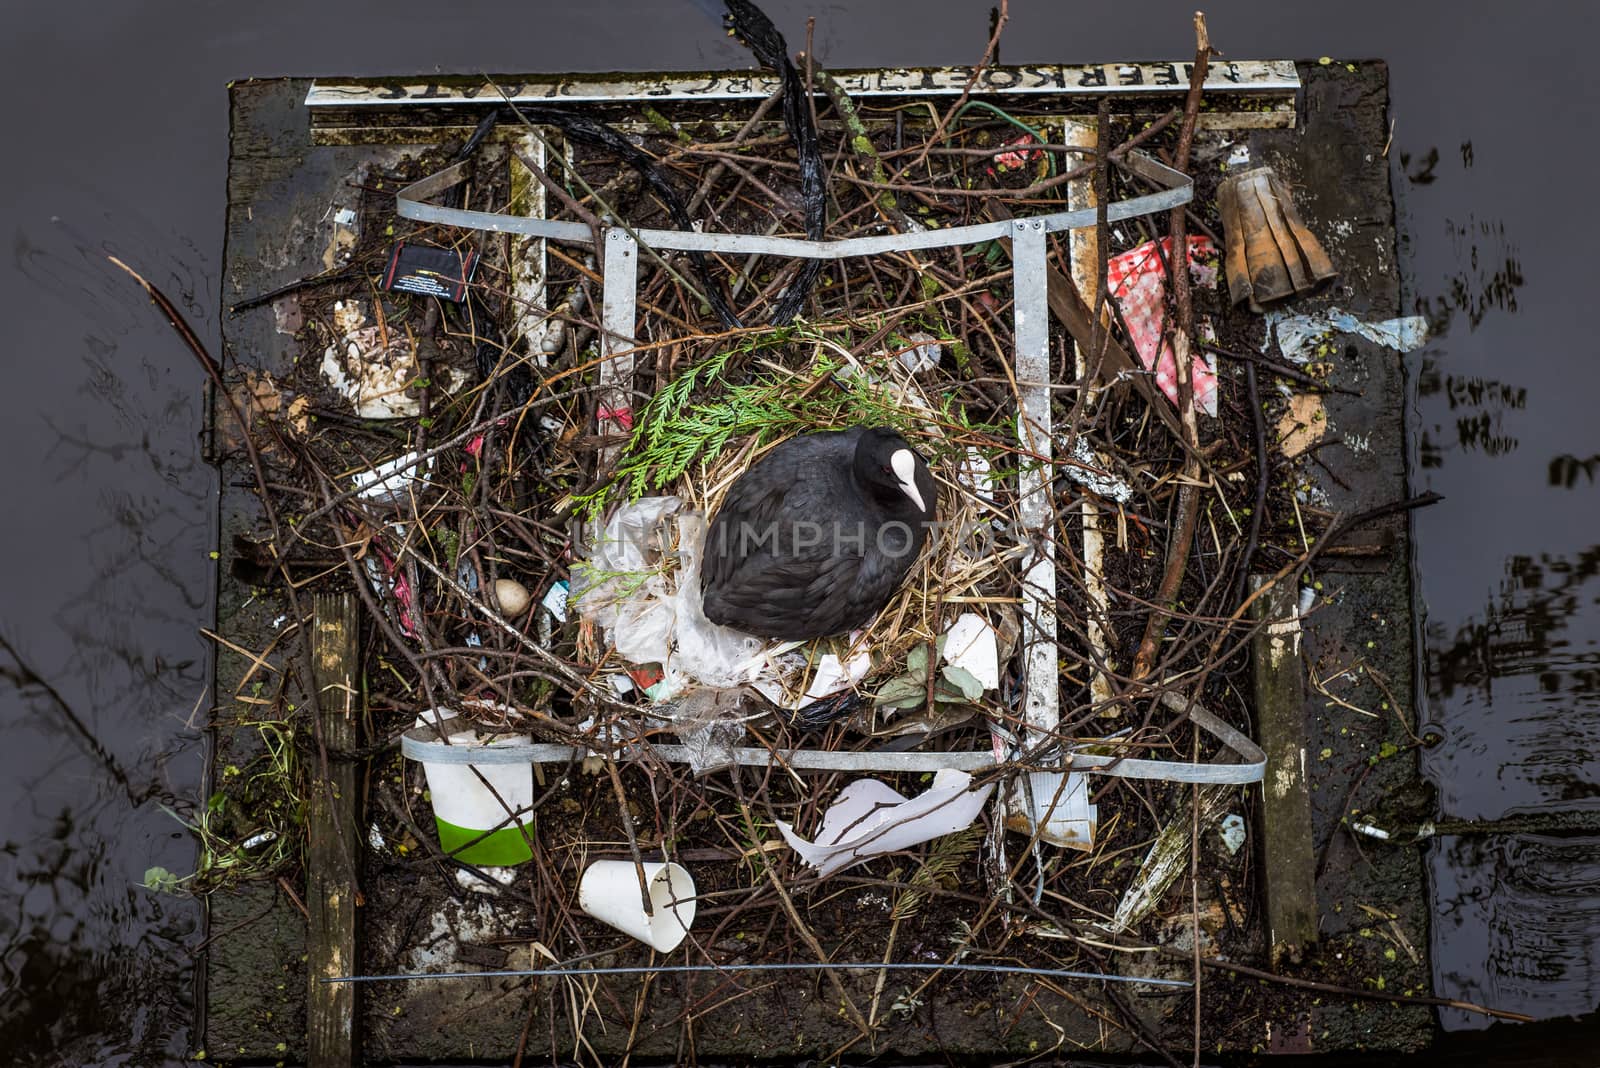 Coot sitting on a nest built with trash and litter, viewed from above by Pendleton